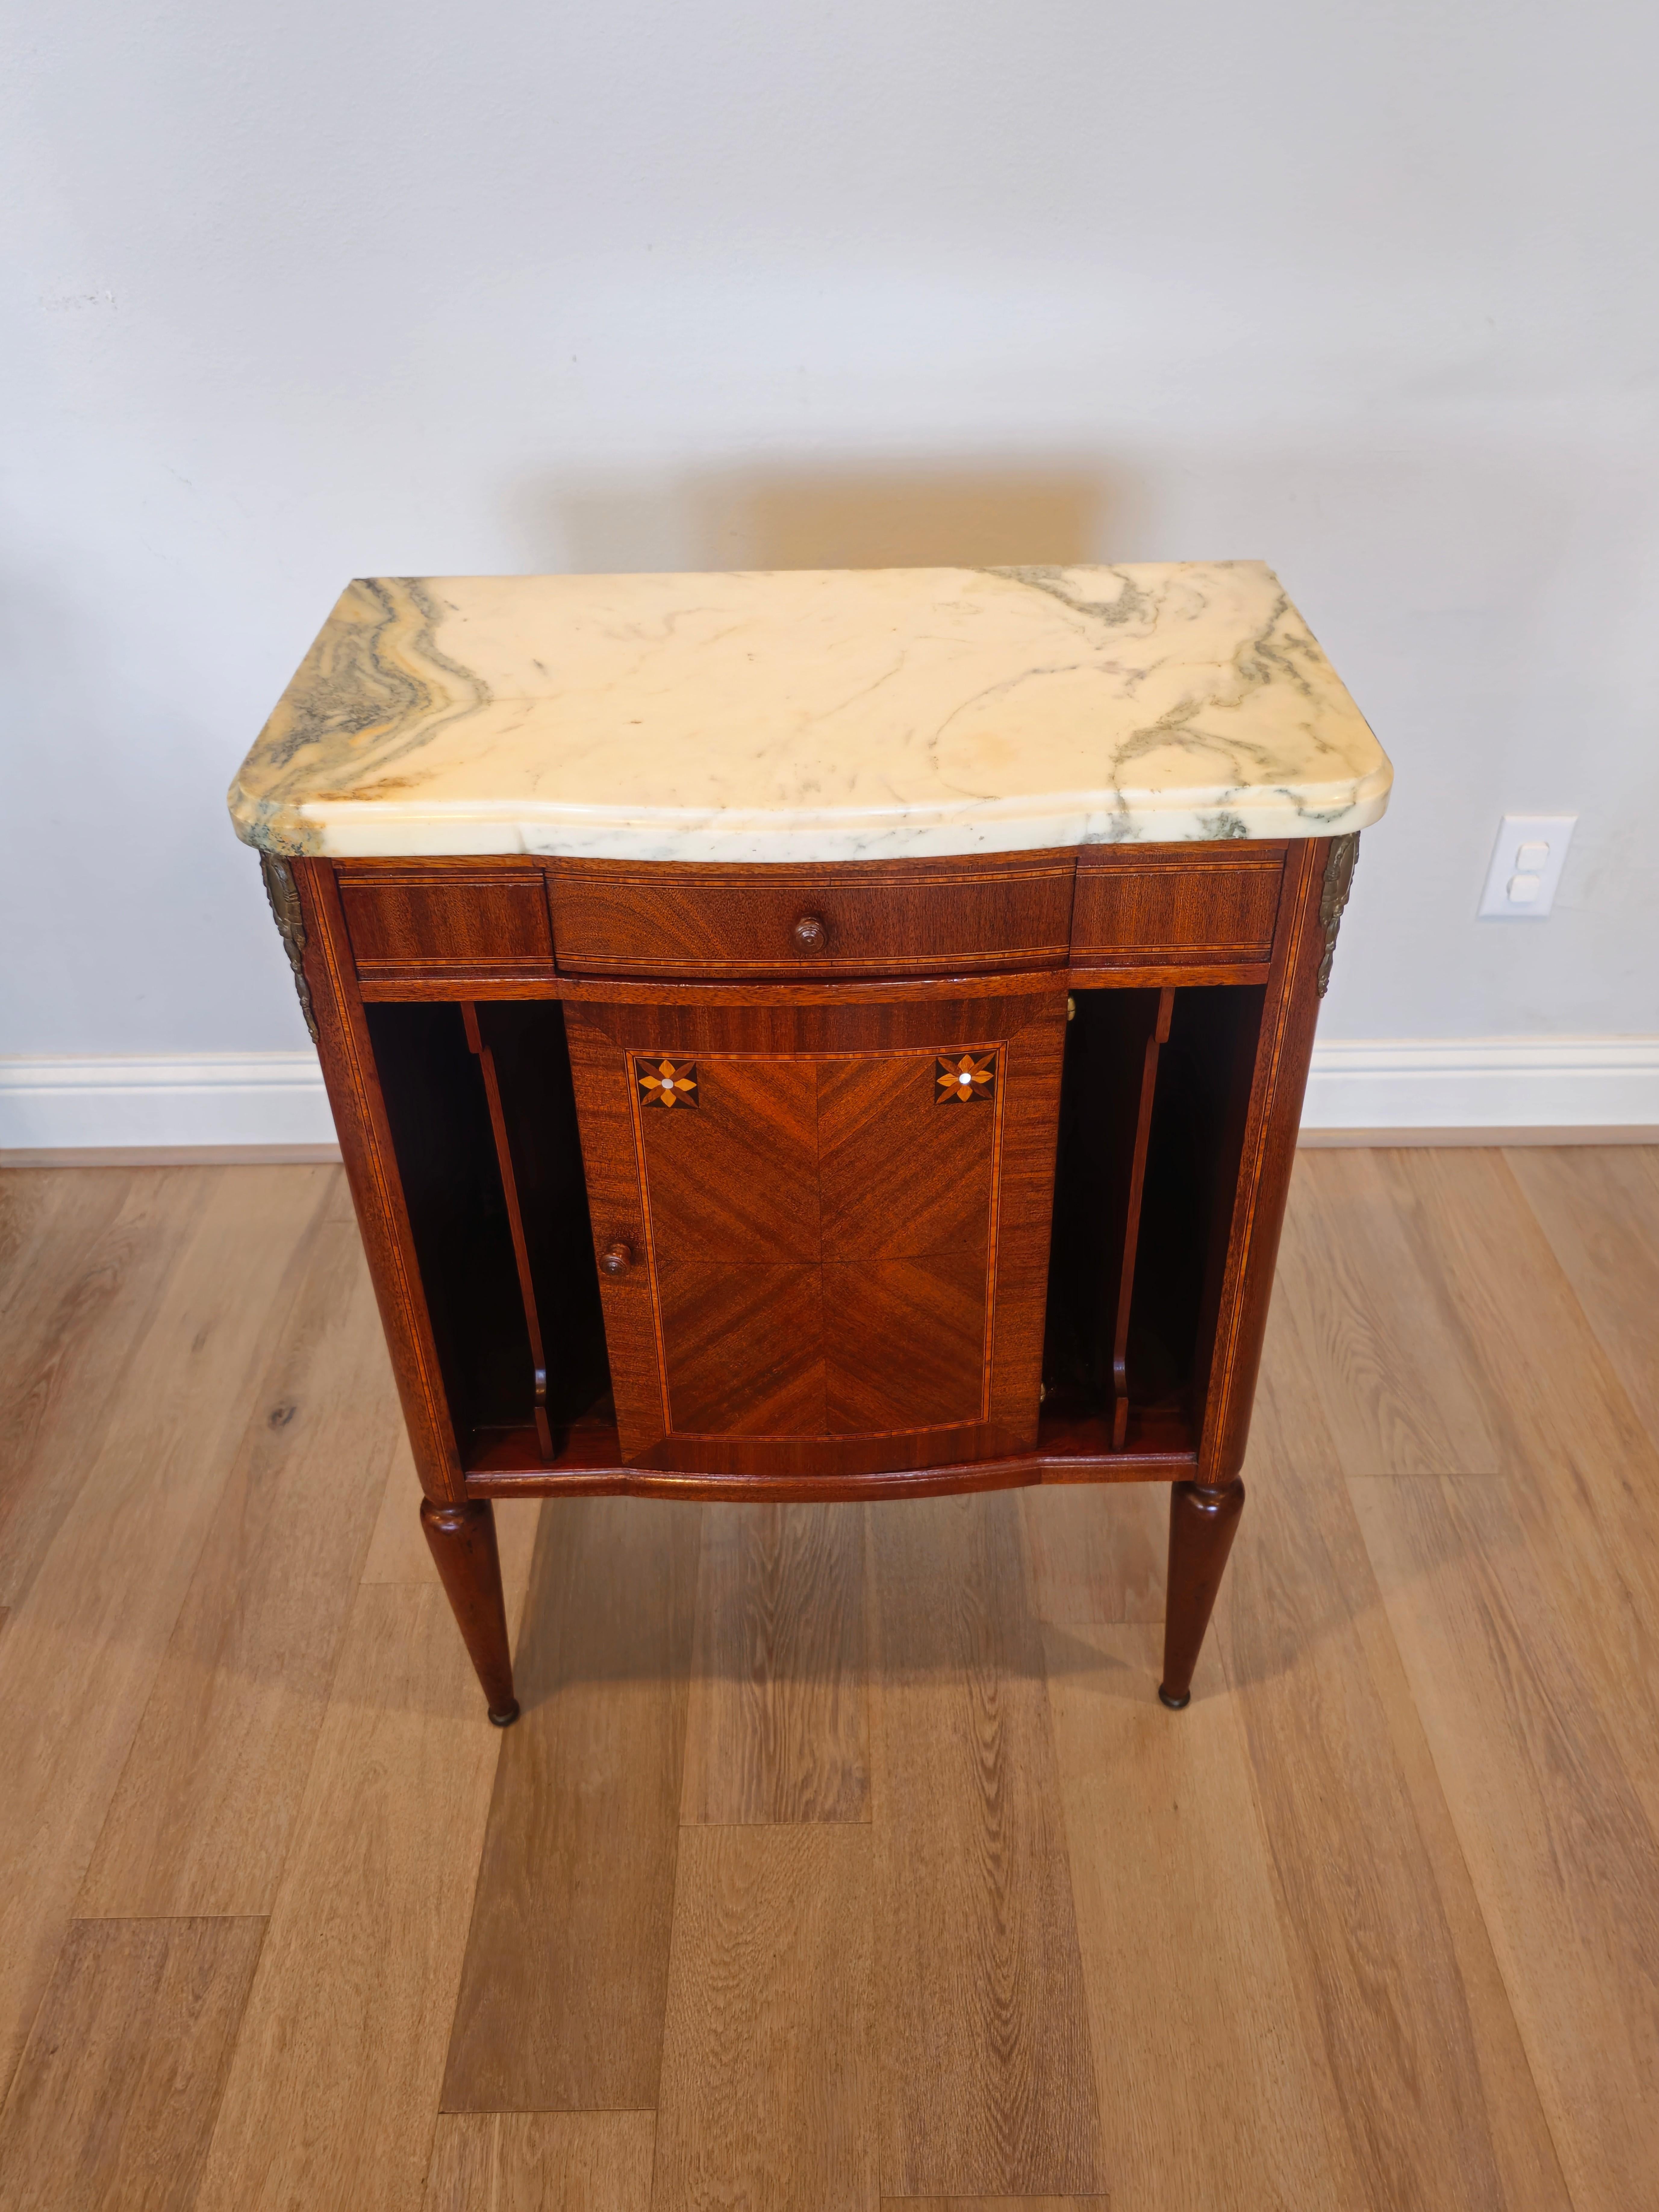 A lovely 1920s French Art Deco marble-top gilt bronze mounted mahogany inlaid nightstand.

Born in France in the early 20th century, crafted in elegant Louis XVI taste with luxurious period Art Deco influence, featuring stunning matched mahogany